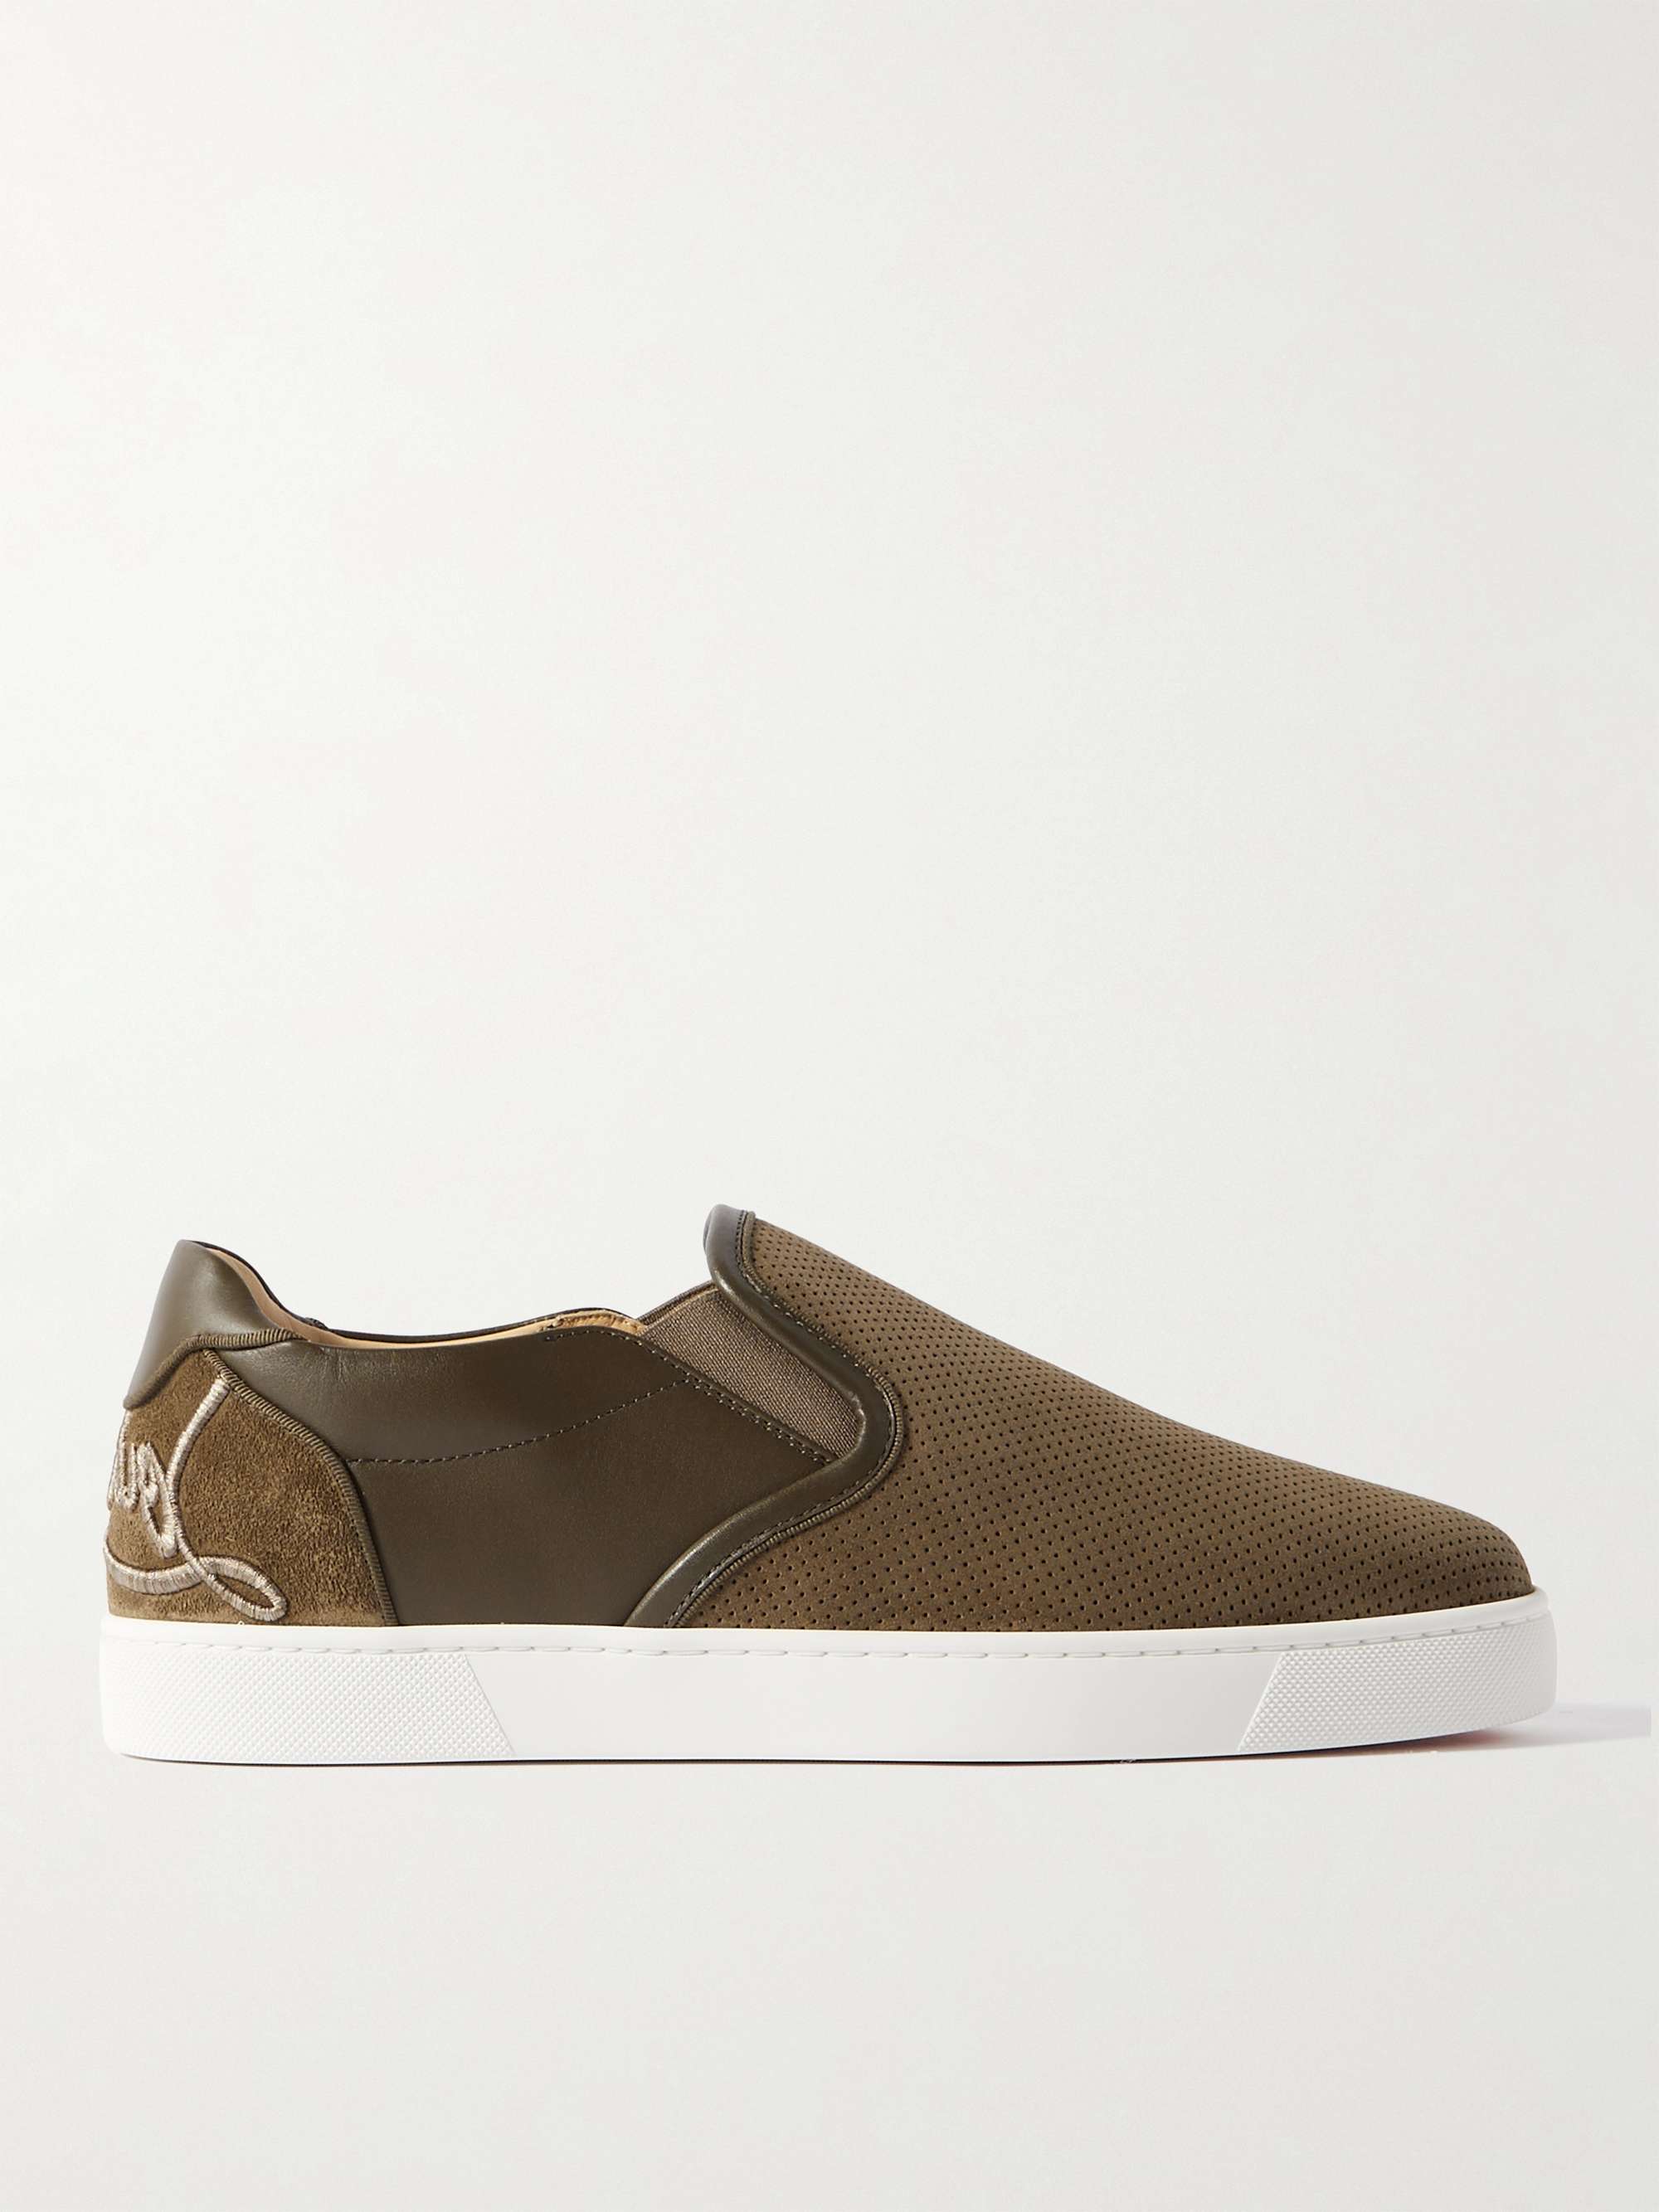 CHRISTIAN LOUBOUTIN Fun Sailor Leather-Trimmed Perforated Suede Slip-On  Sneakers for Men | MR PORTER